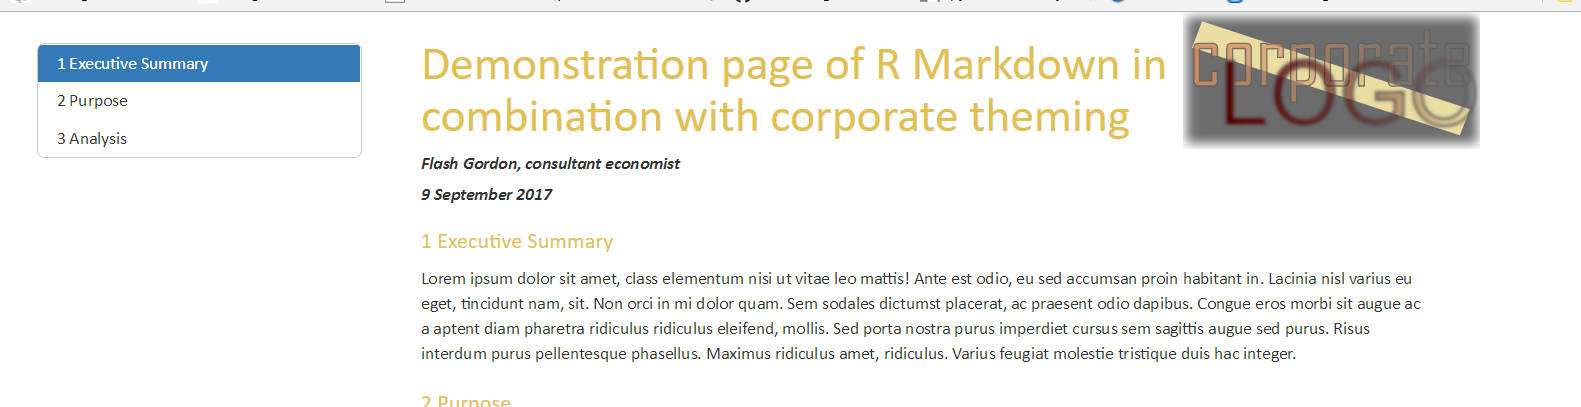 r-markdown-for-documents-with-logos-watermarks-and-corporate-styles